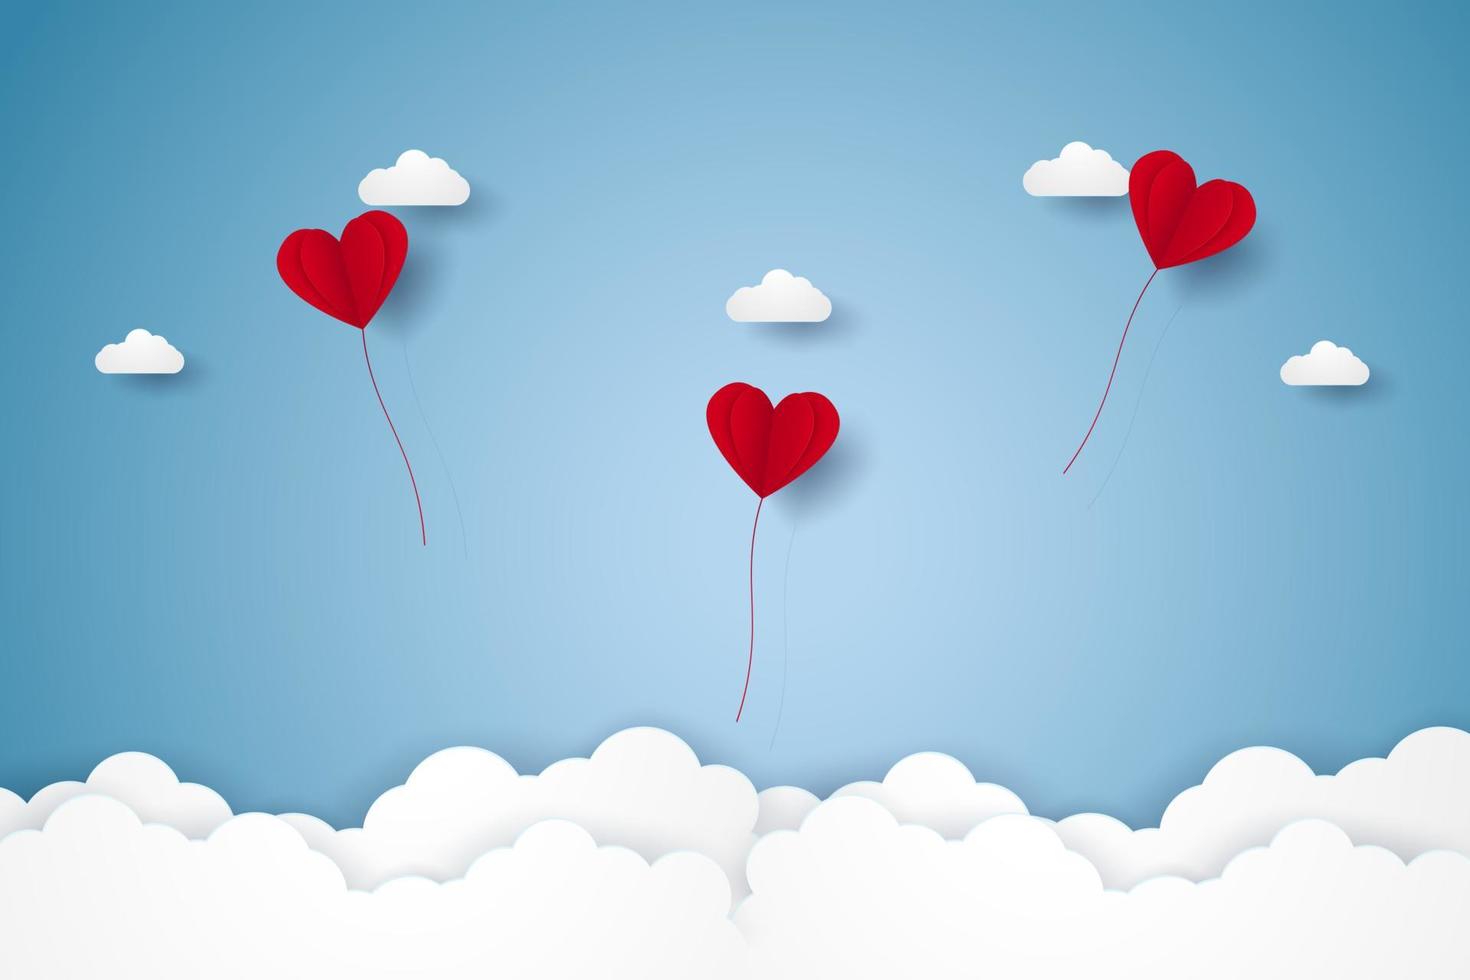 Valentines day, Illustration of love, red heart balloons flying in the sky, paper art style vector